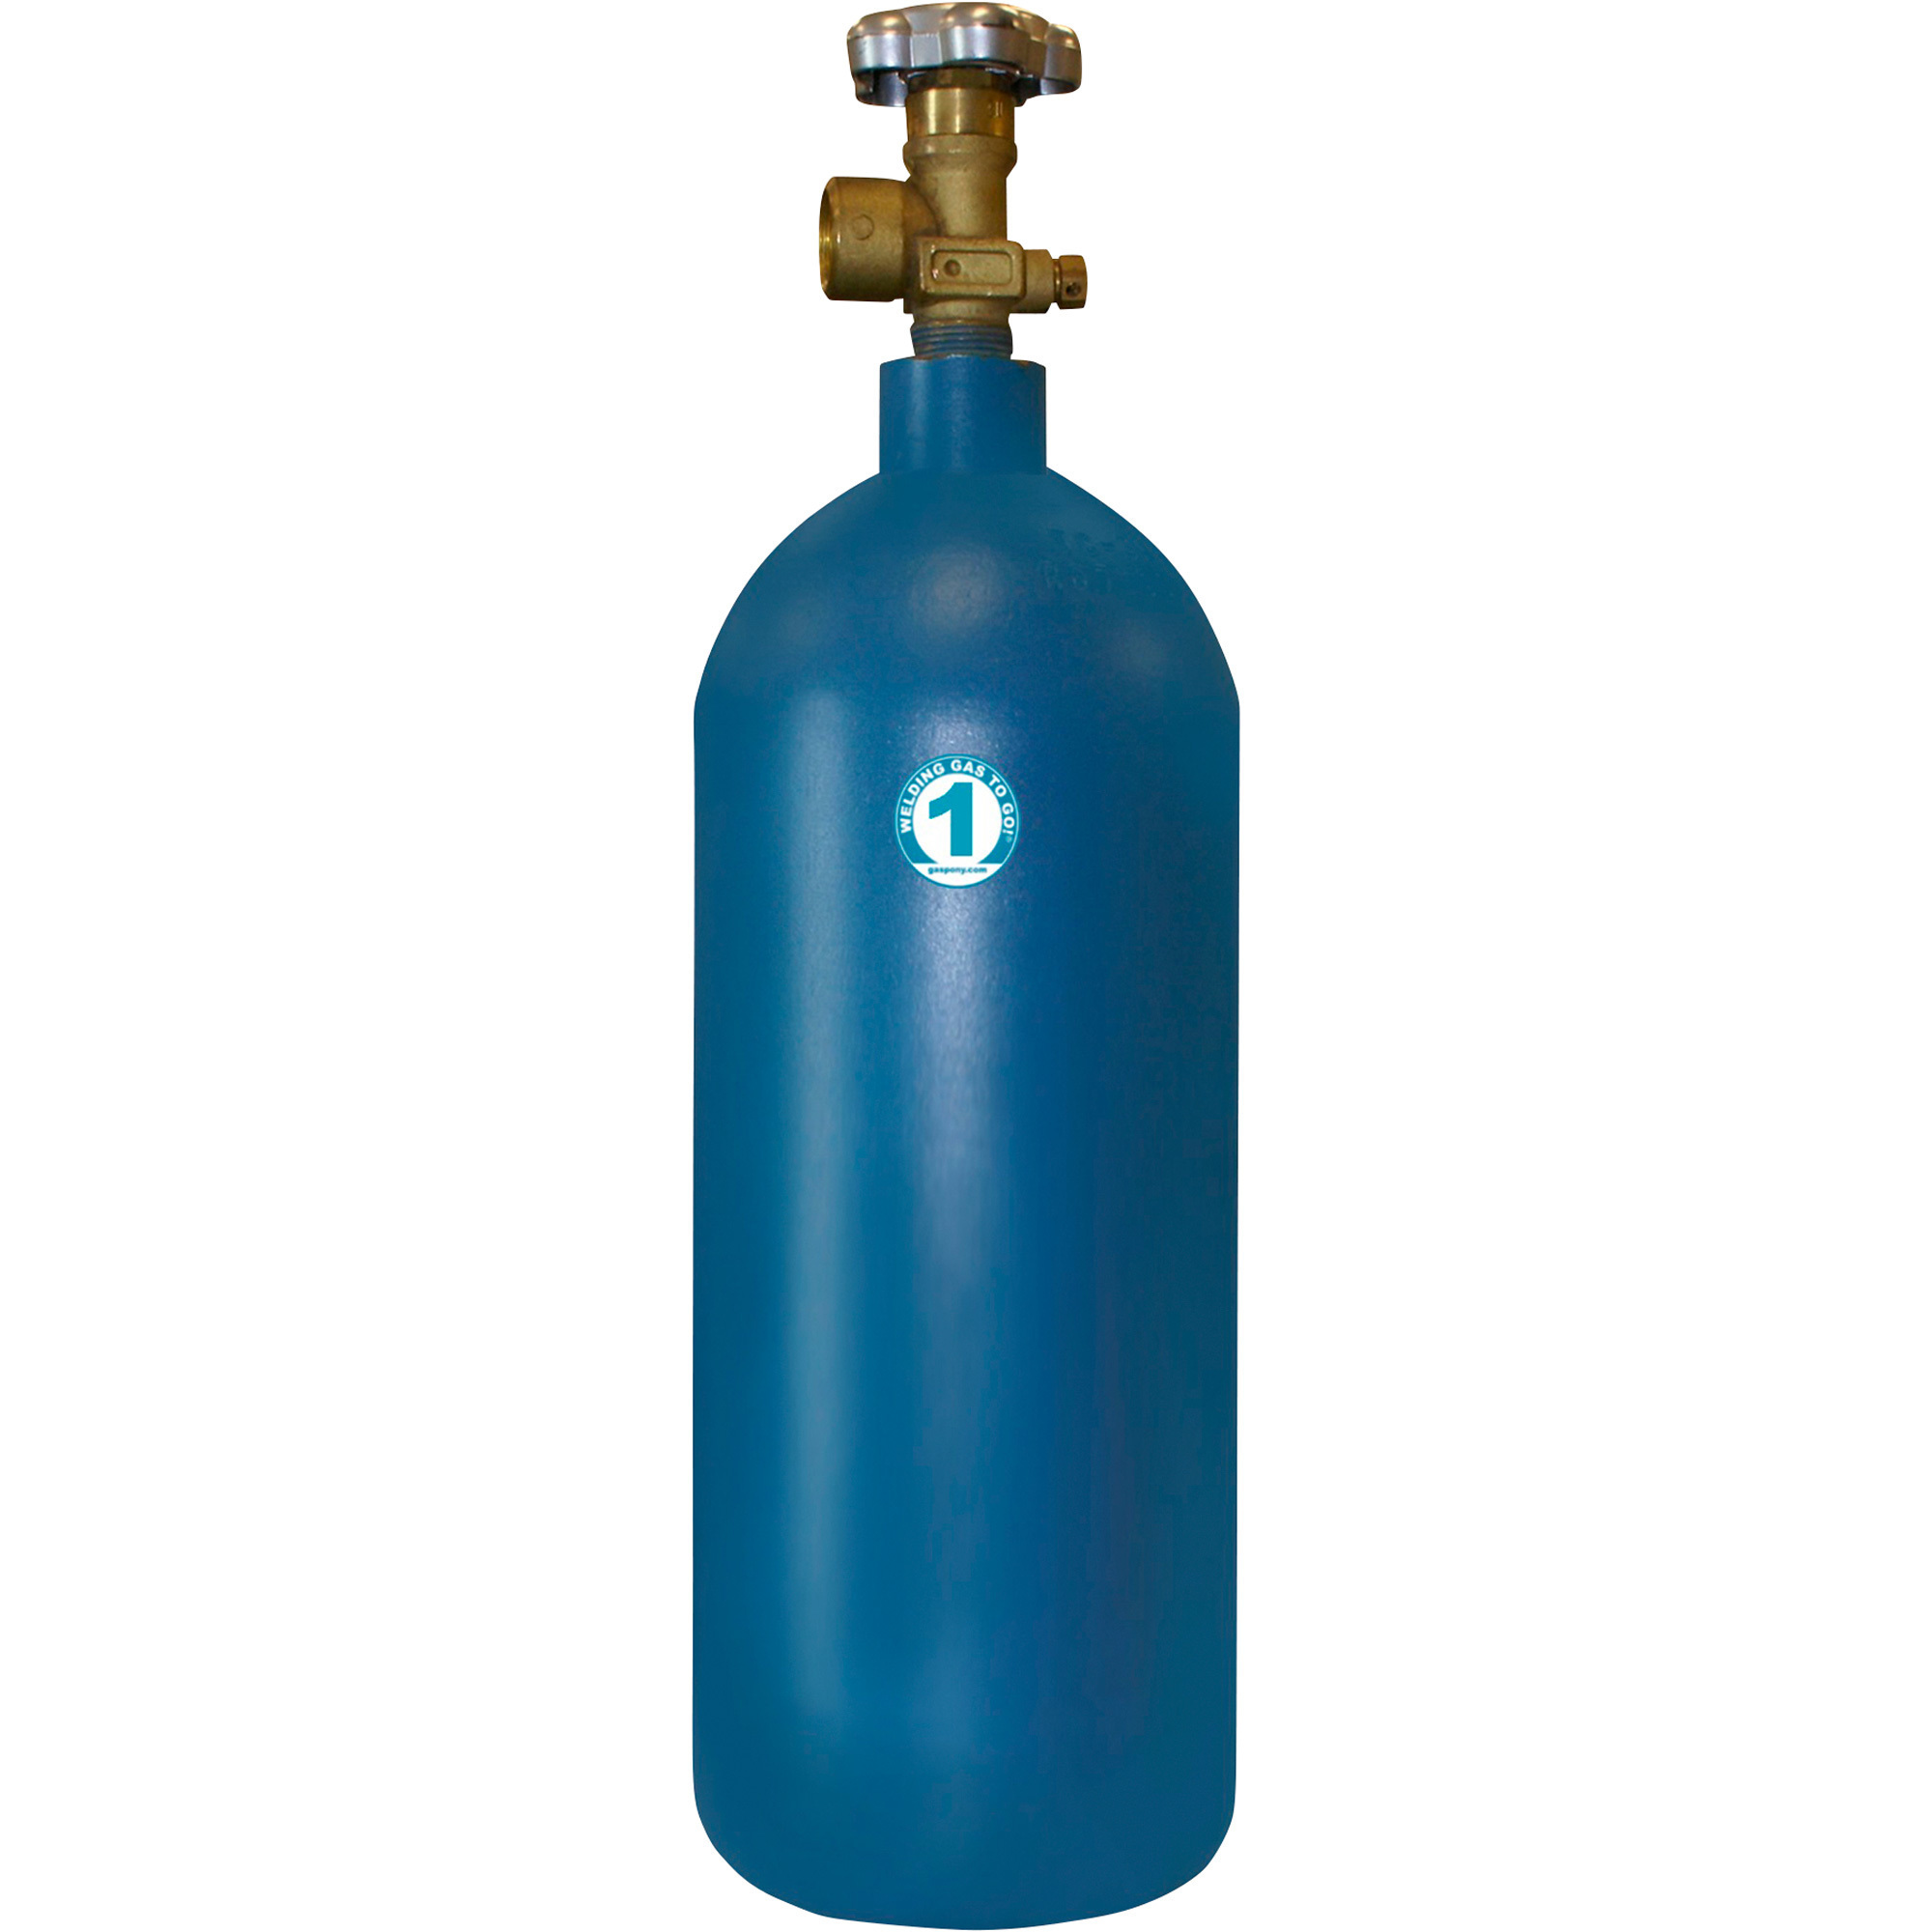 Thoroughbred 75/25 Argon/CO2 Gas Cylinder Fill or Exchange â Size #1, 20CF